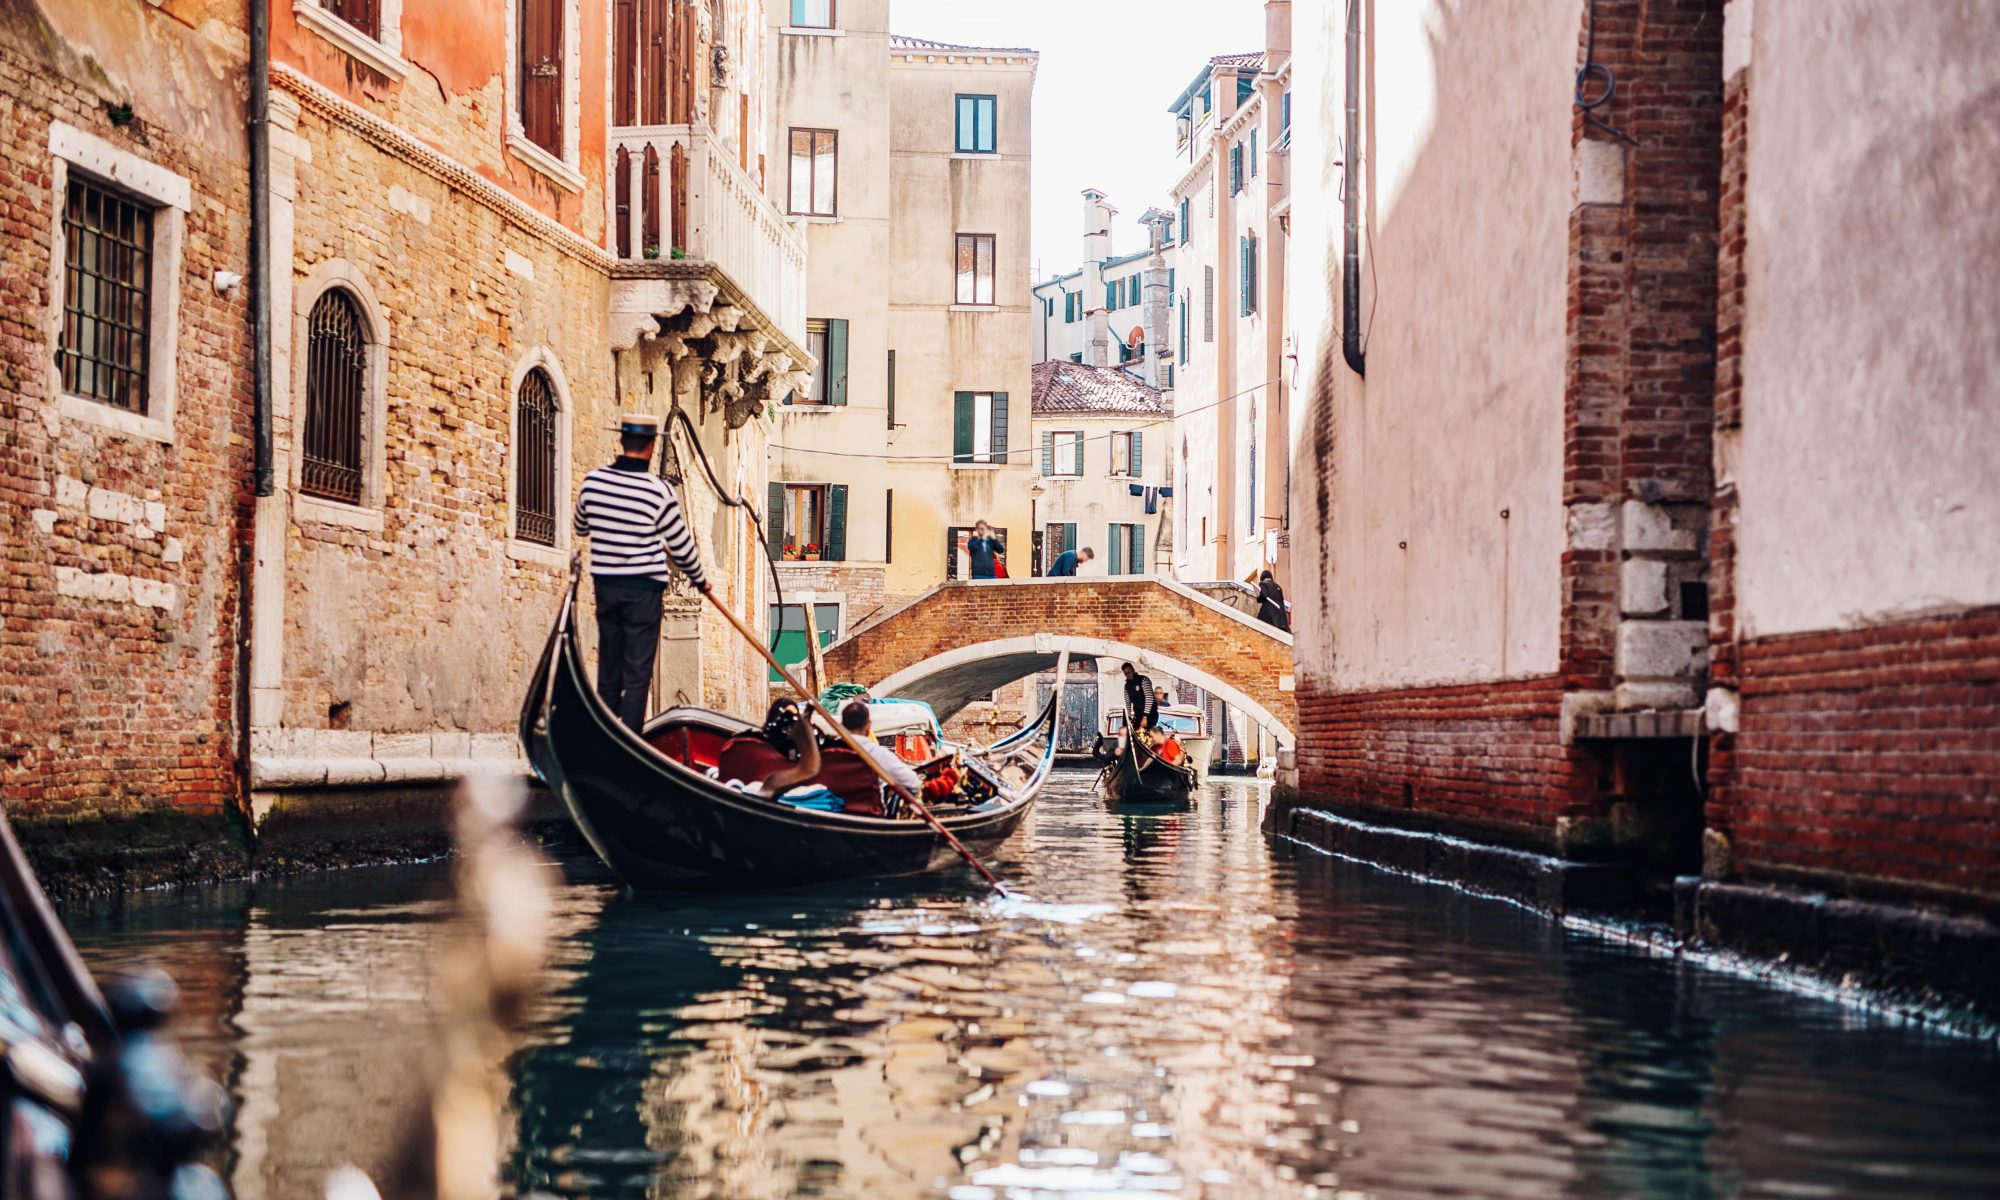 View of a canal of Venice where gondola rides take place.